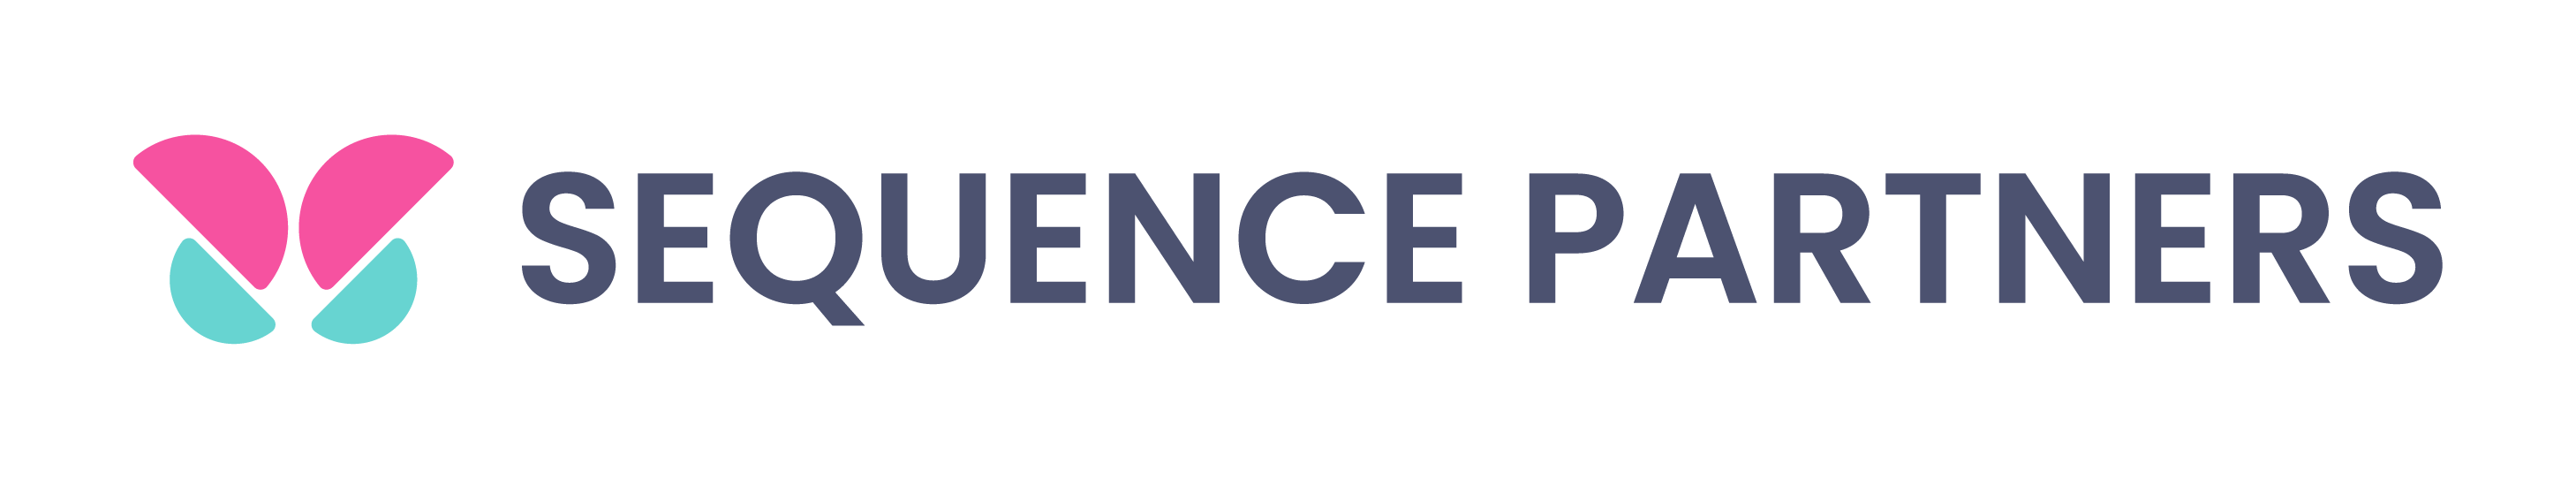 sequence partners logo